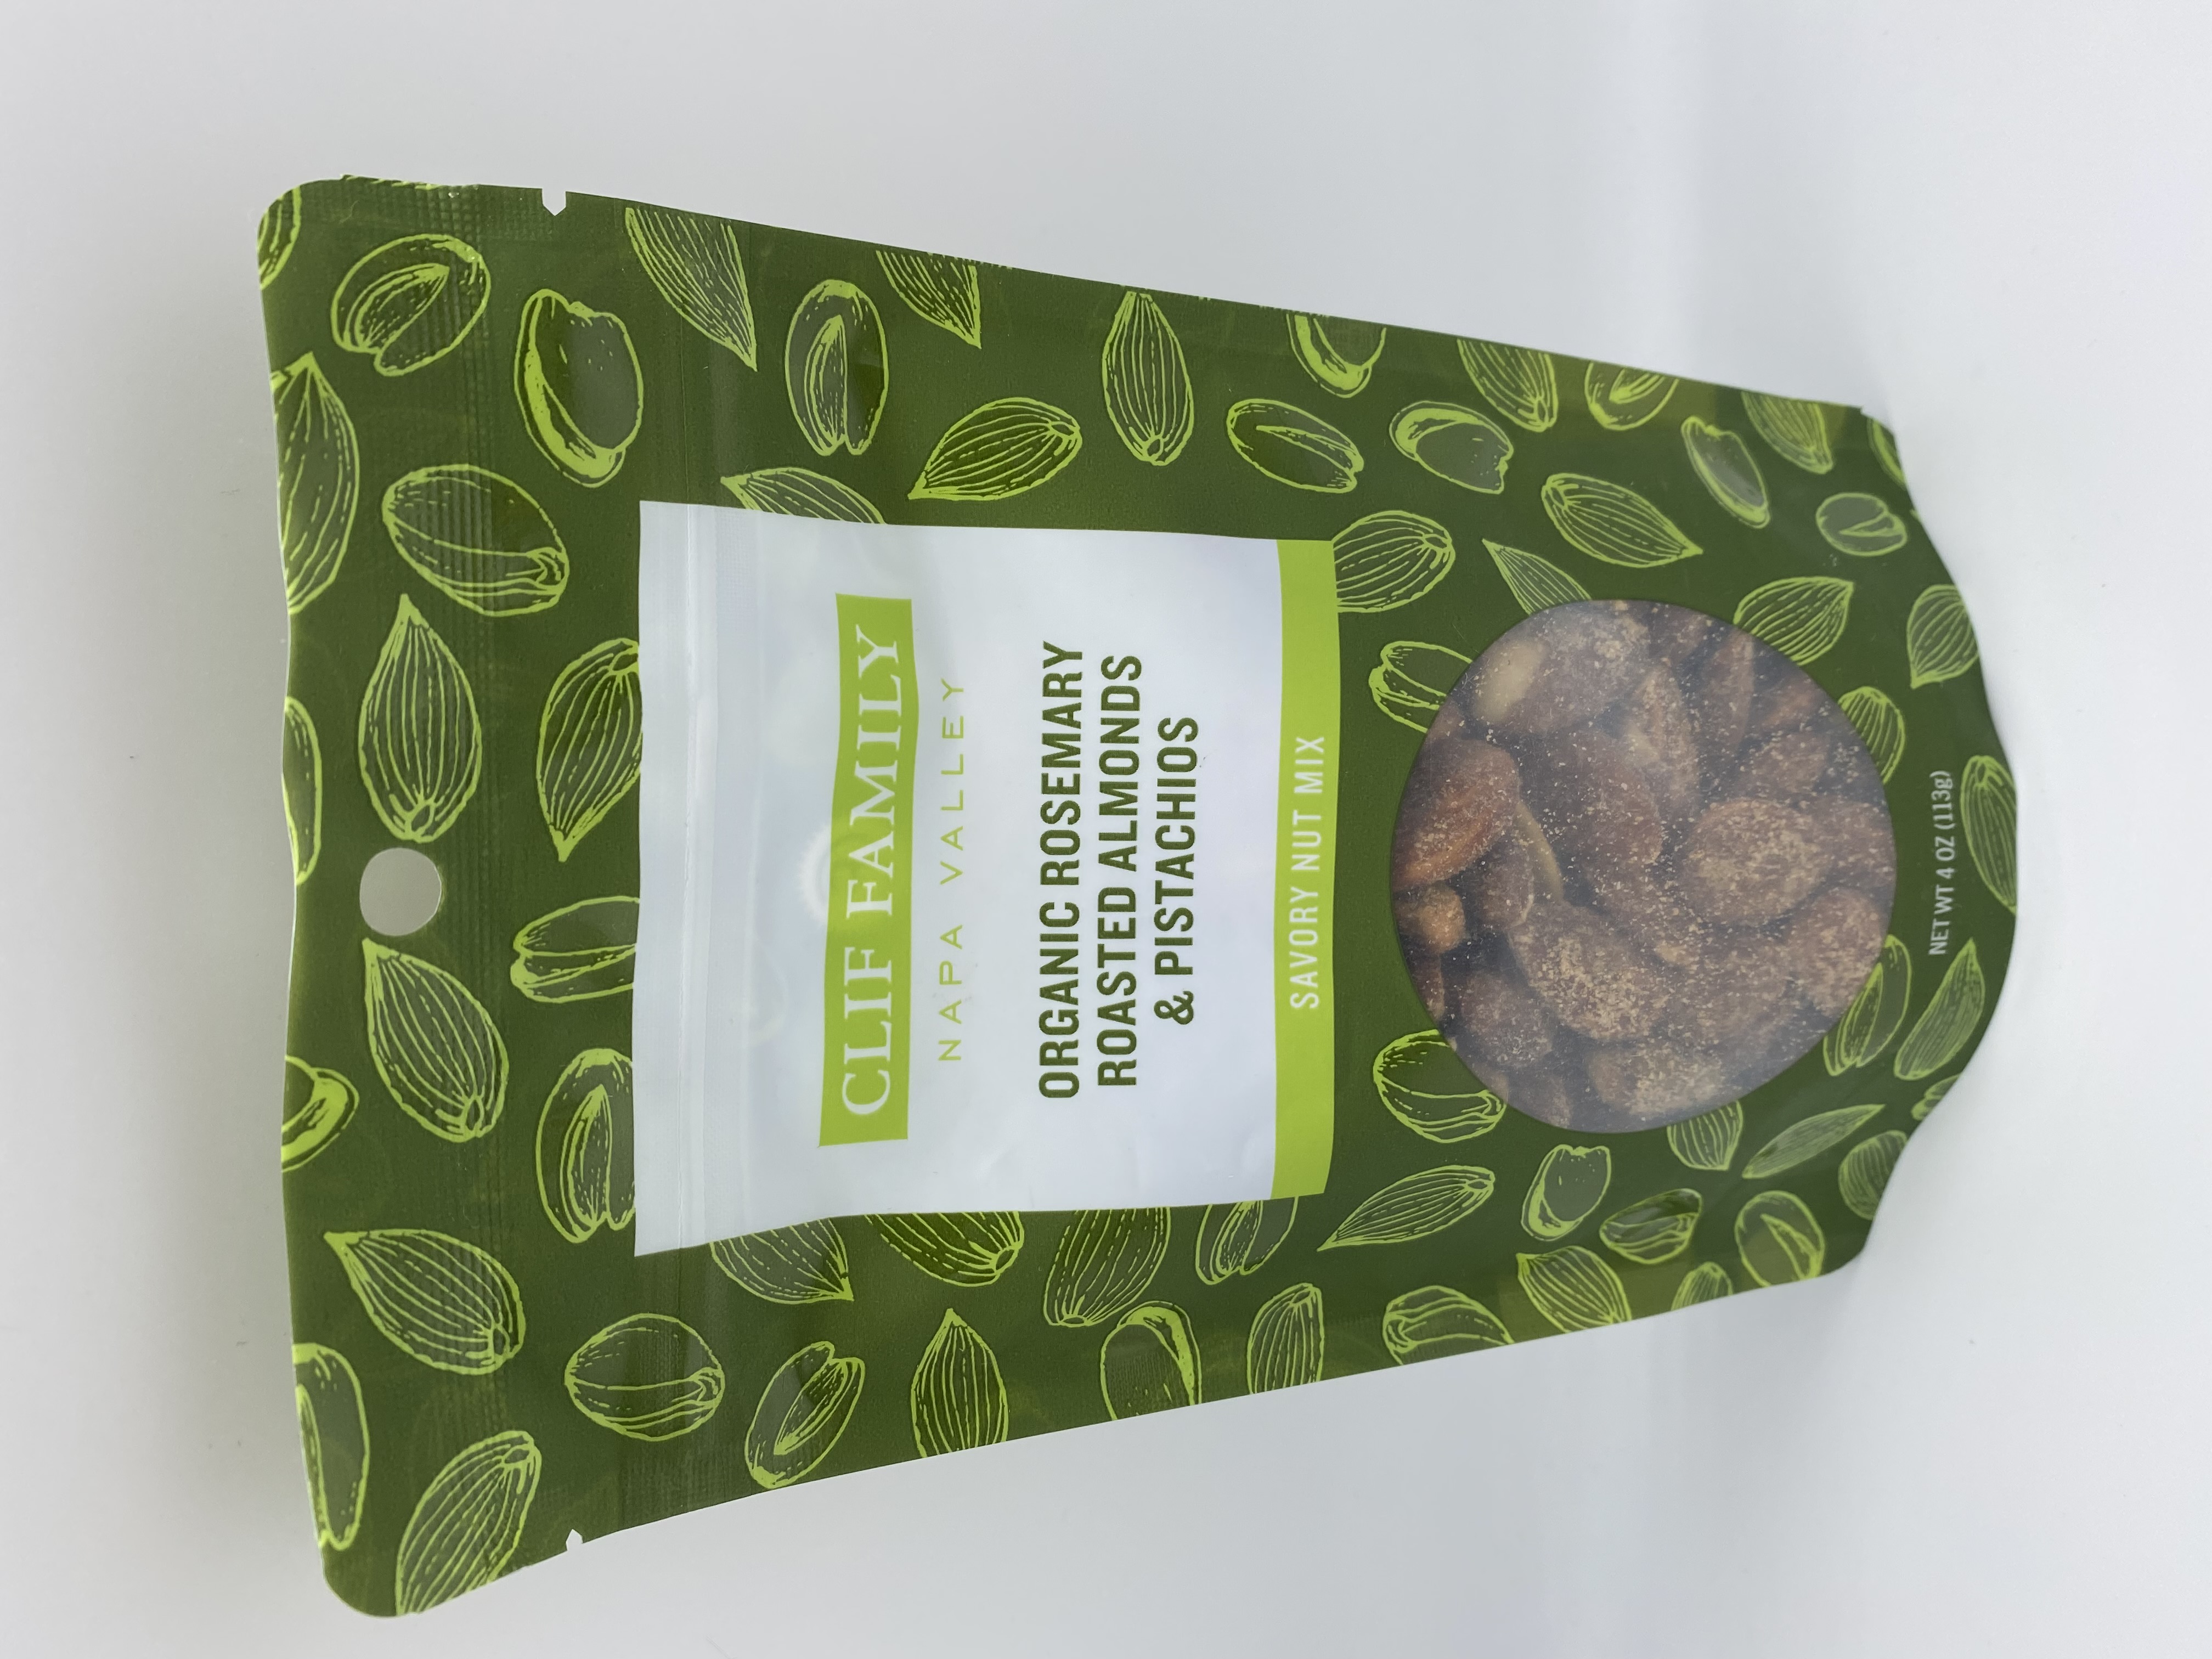 Product Image for Organic Rosemary Savory Nuts